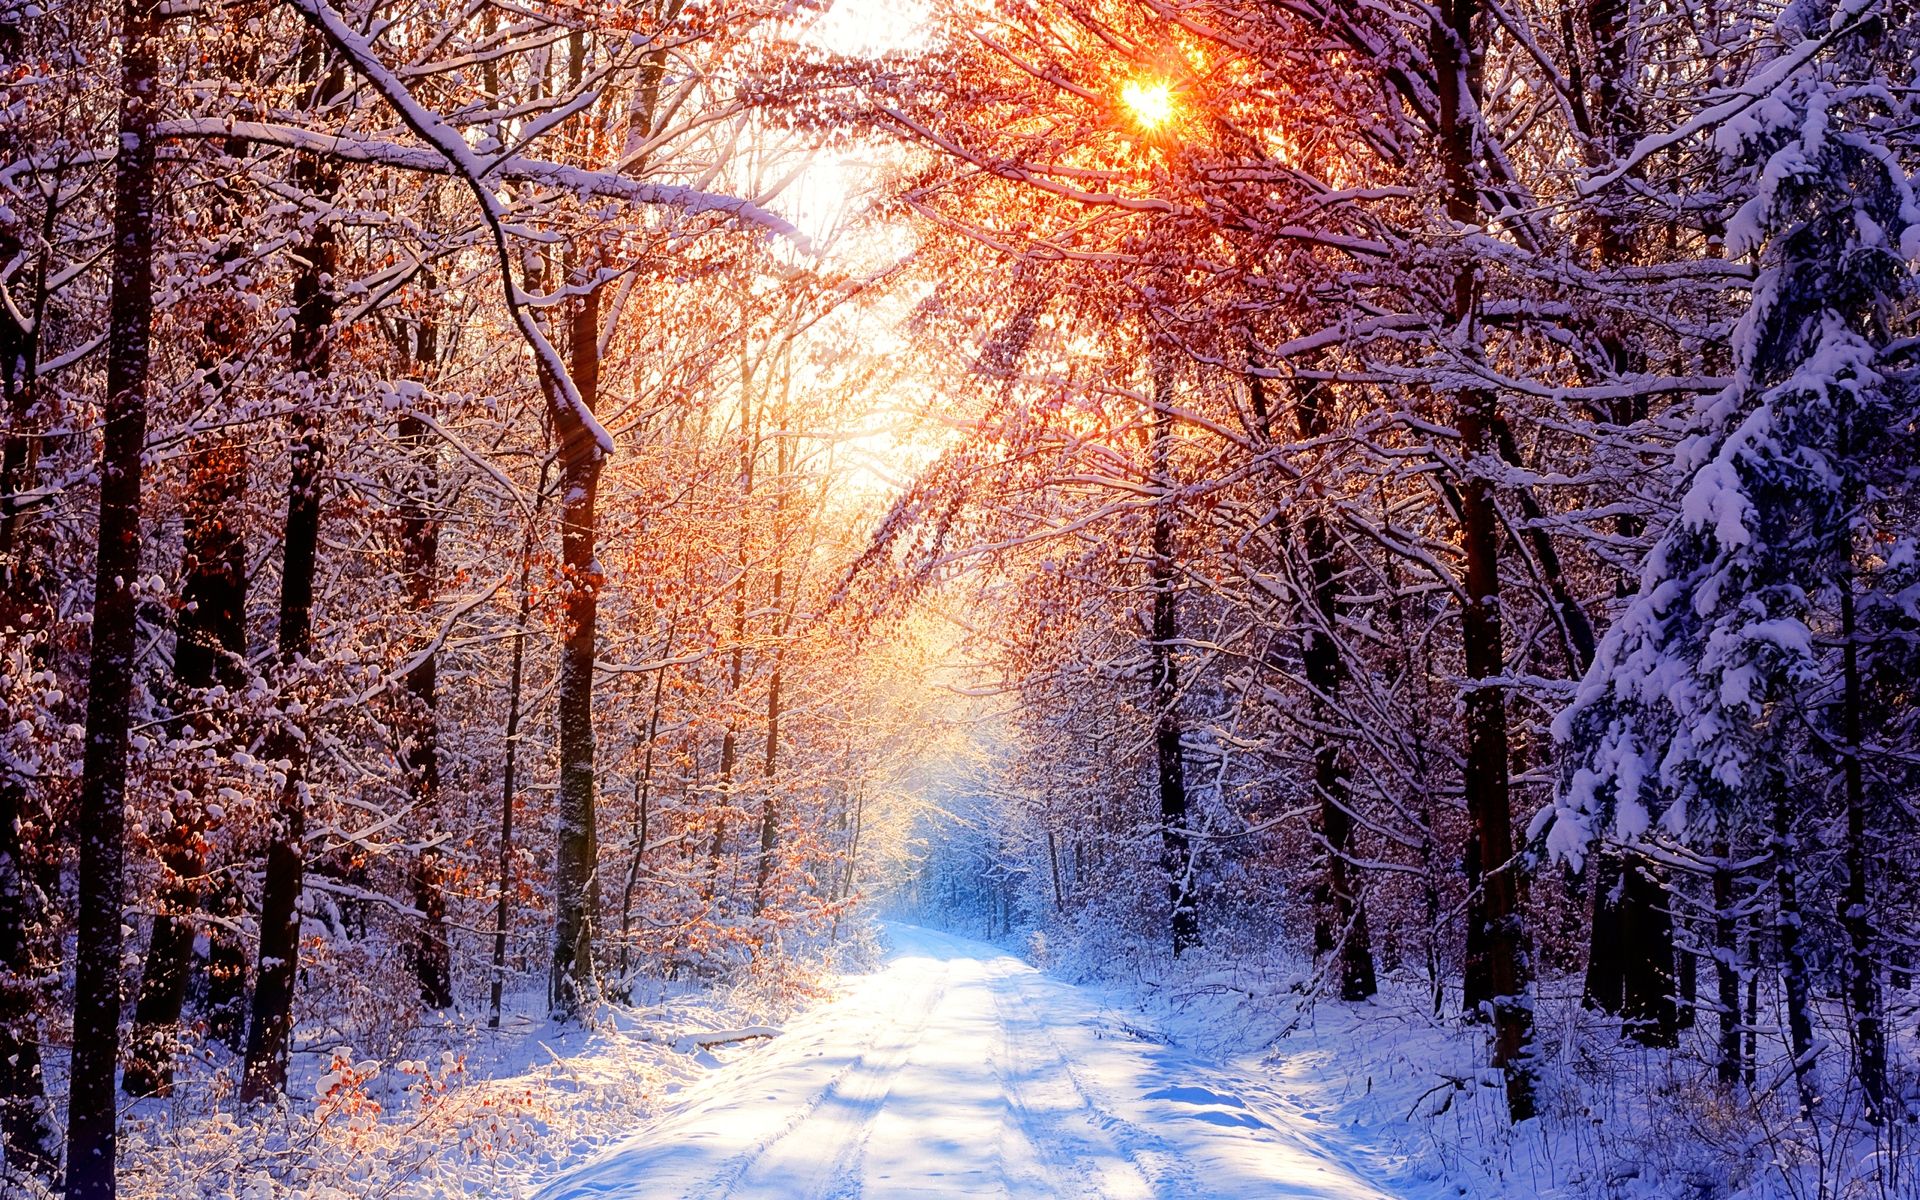 Background Images Nature Winter - HD Wallpaper 